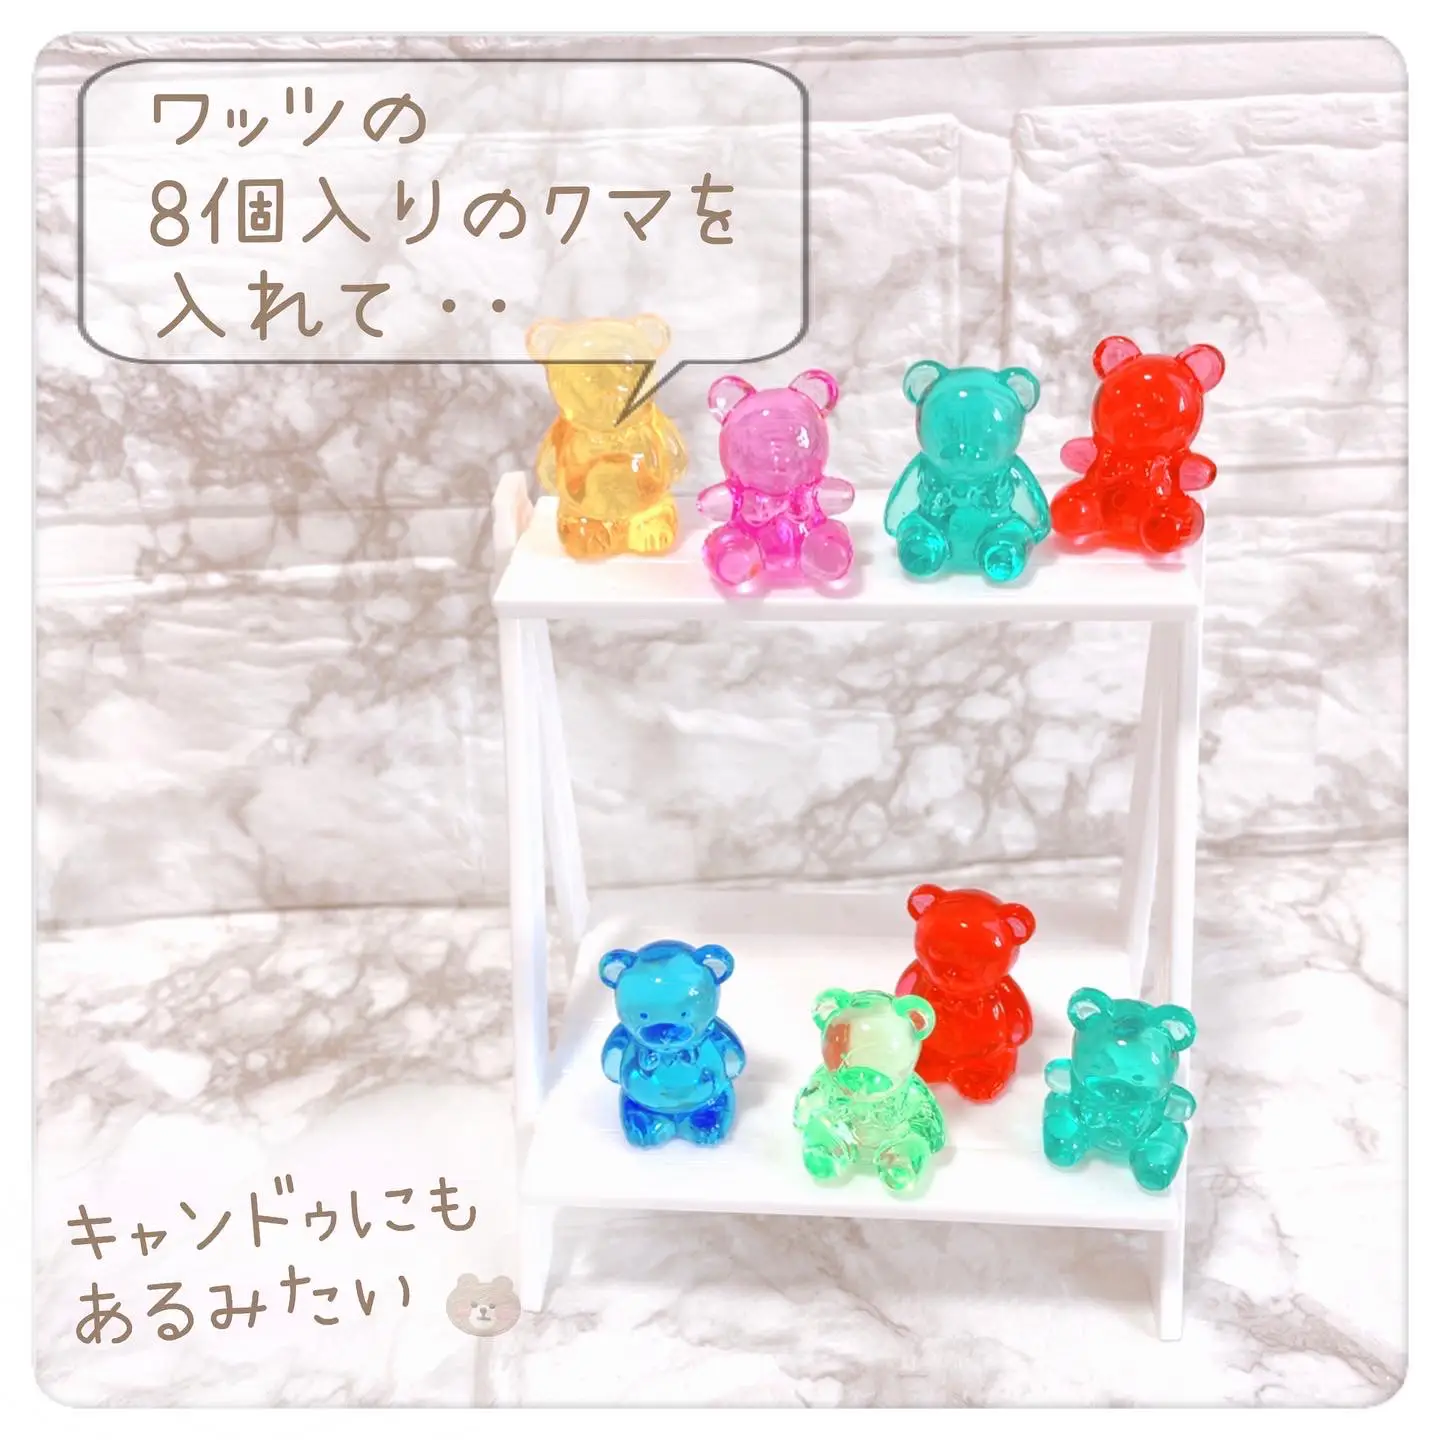 I found these gummy bear beads at the Daiso store! So excited to use t